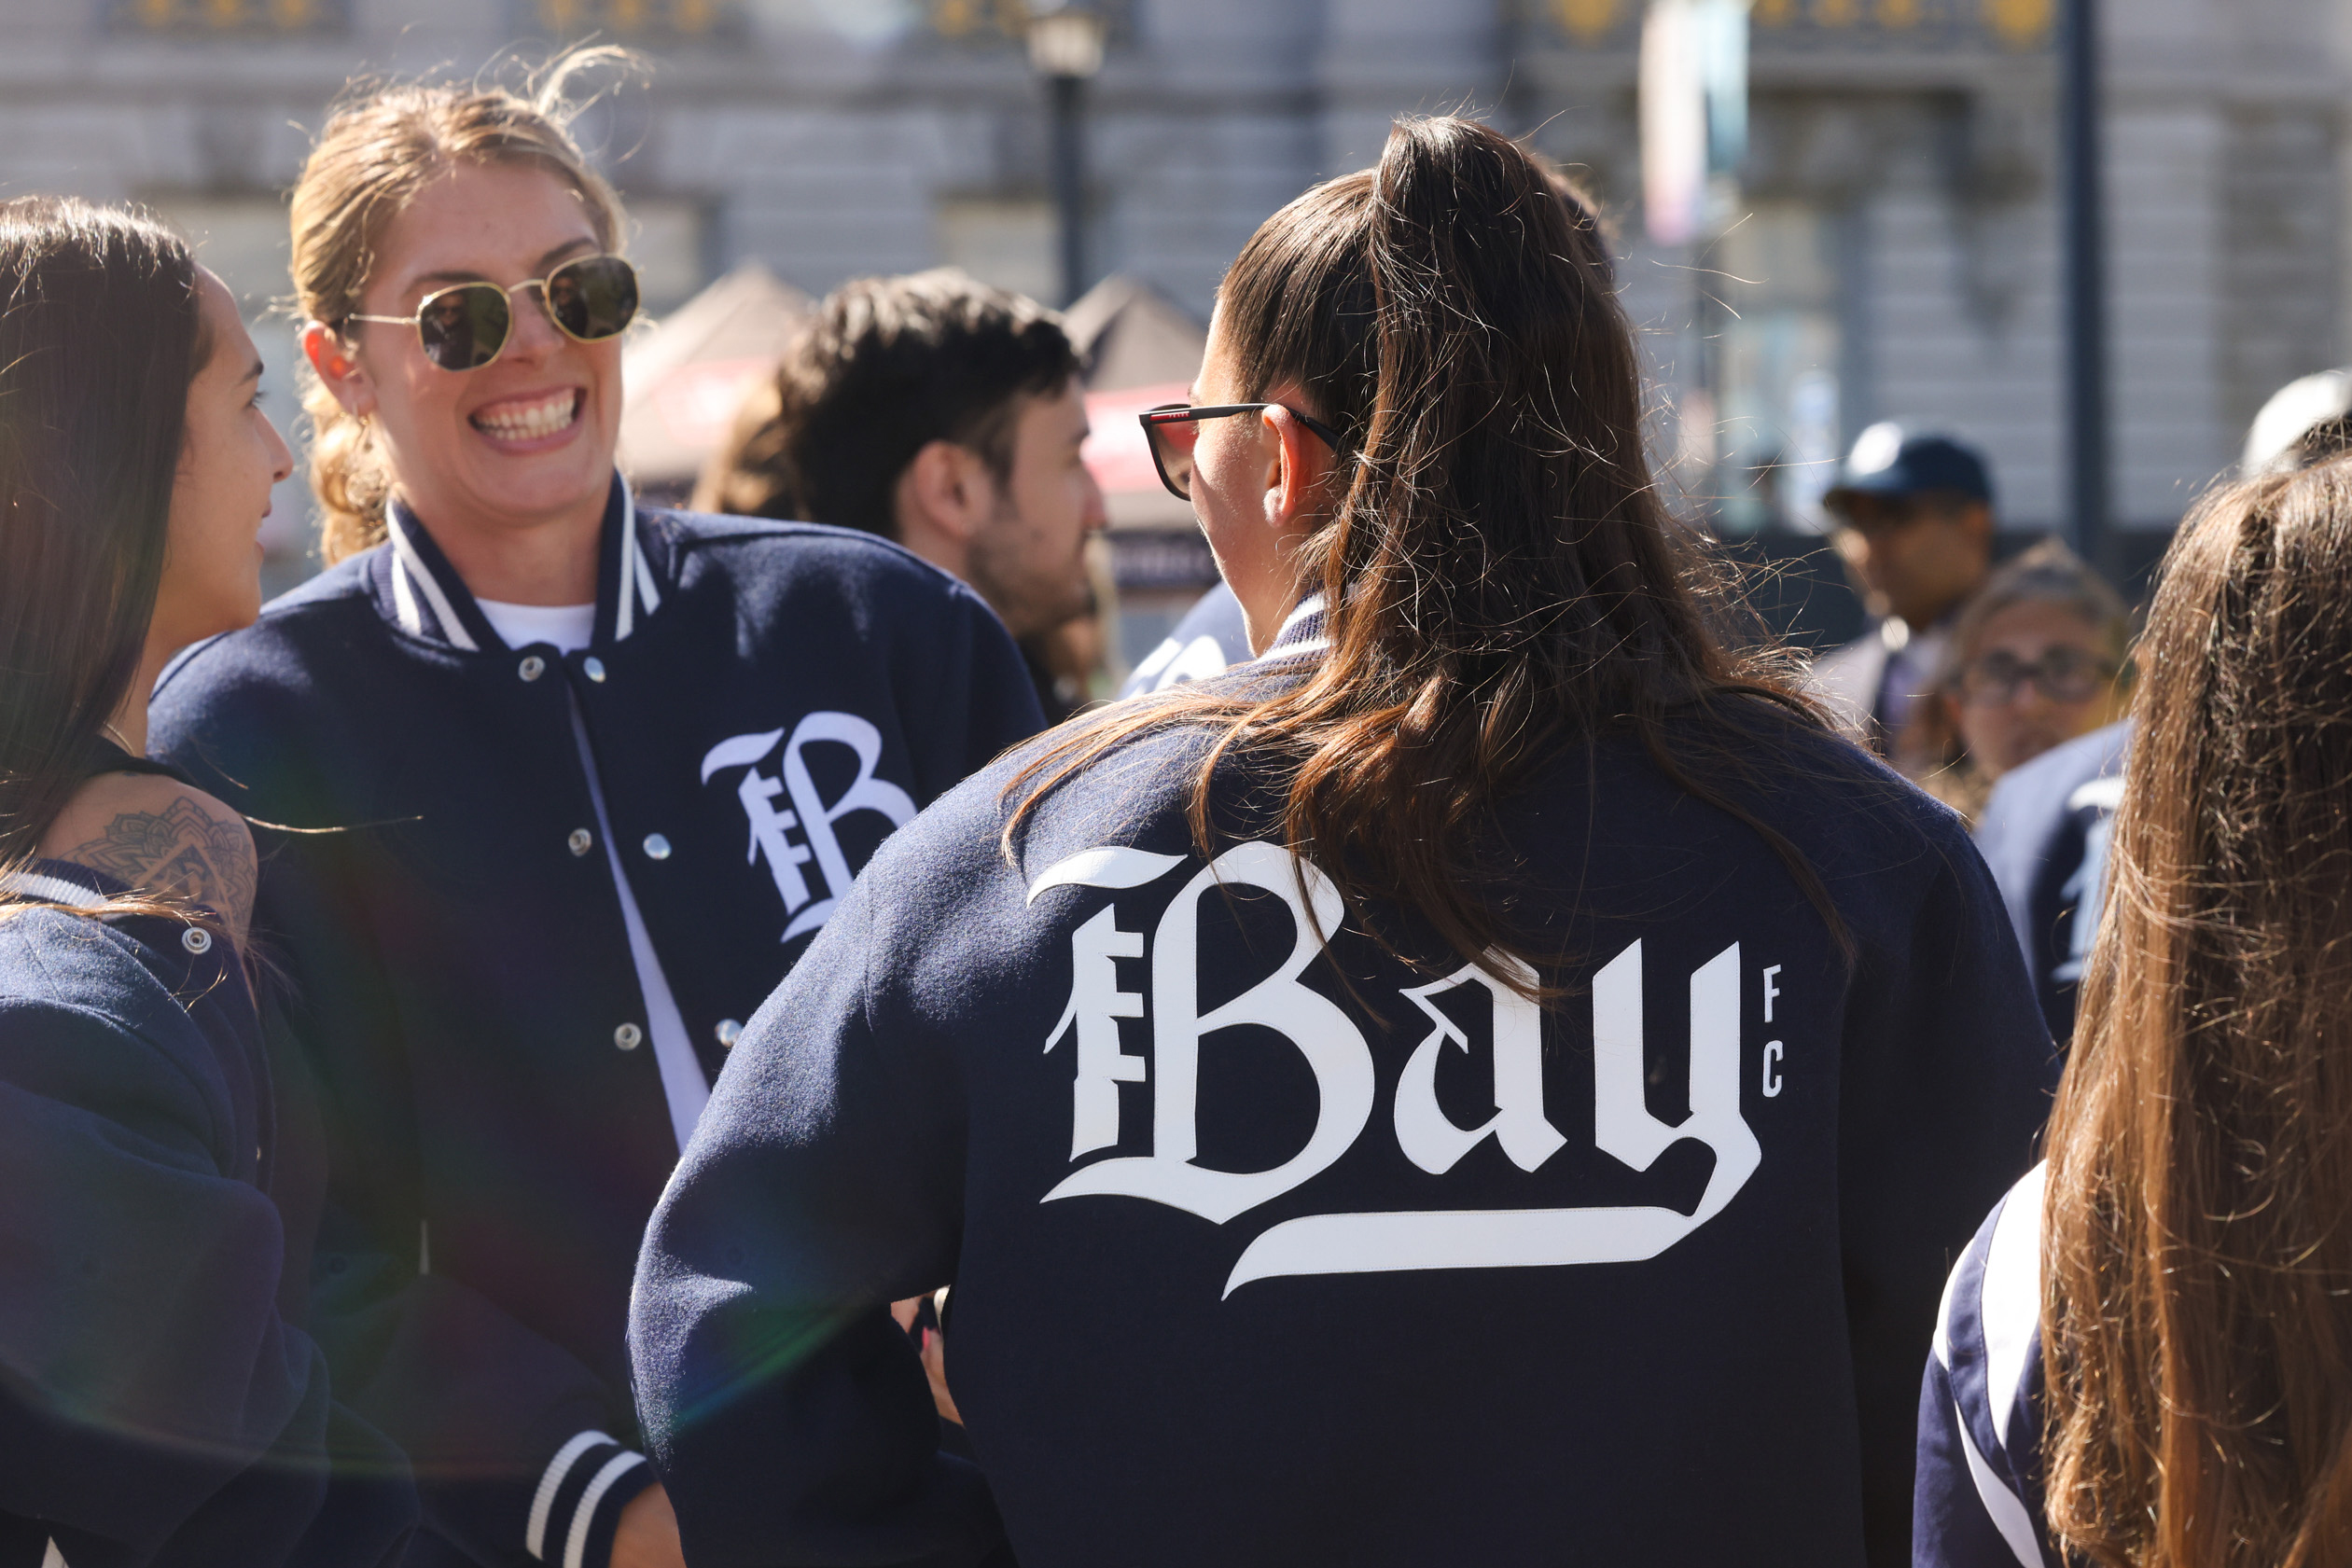 A group of people in a crowd, one wearing a jacket with "The Bay" printed on the back.